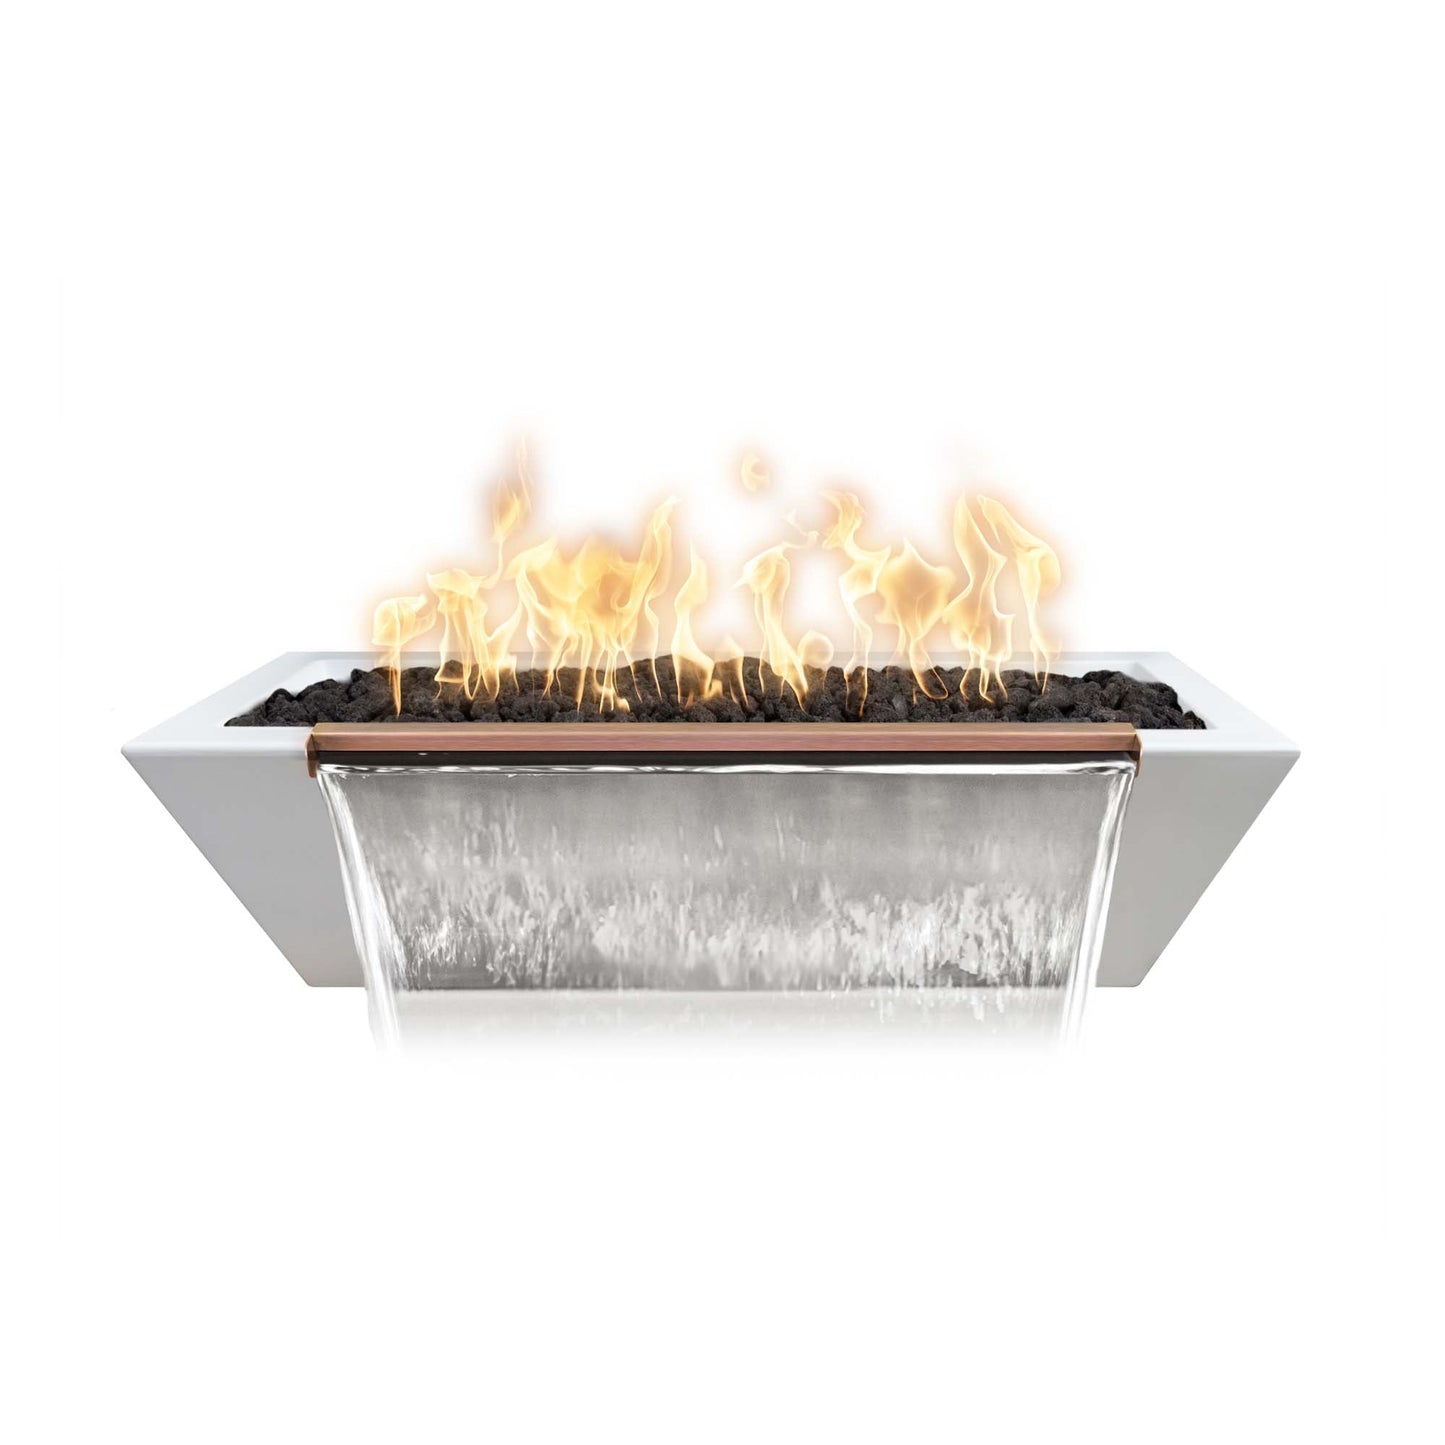 The Outdoor Plus Linear Maya 72" Metallic Slate GFRC Concrete Natural Gas Fire & Water Bowl with Match Lit Ignition